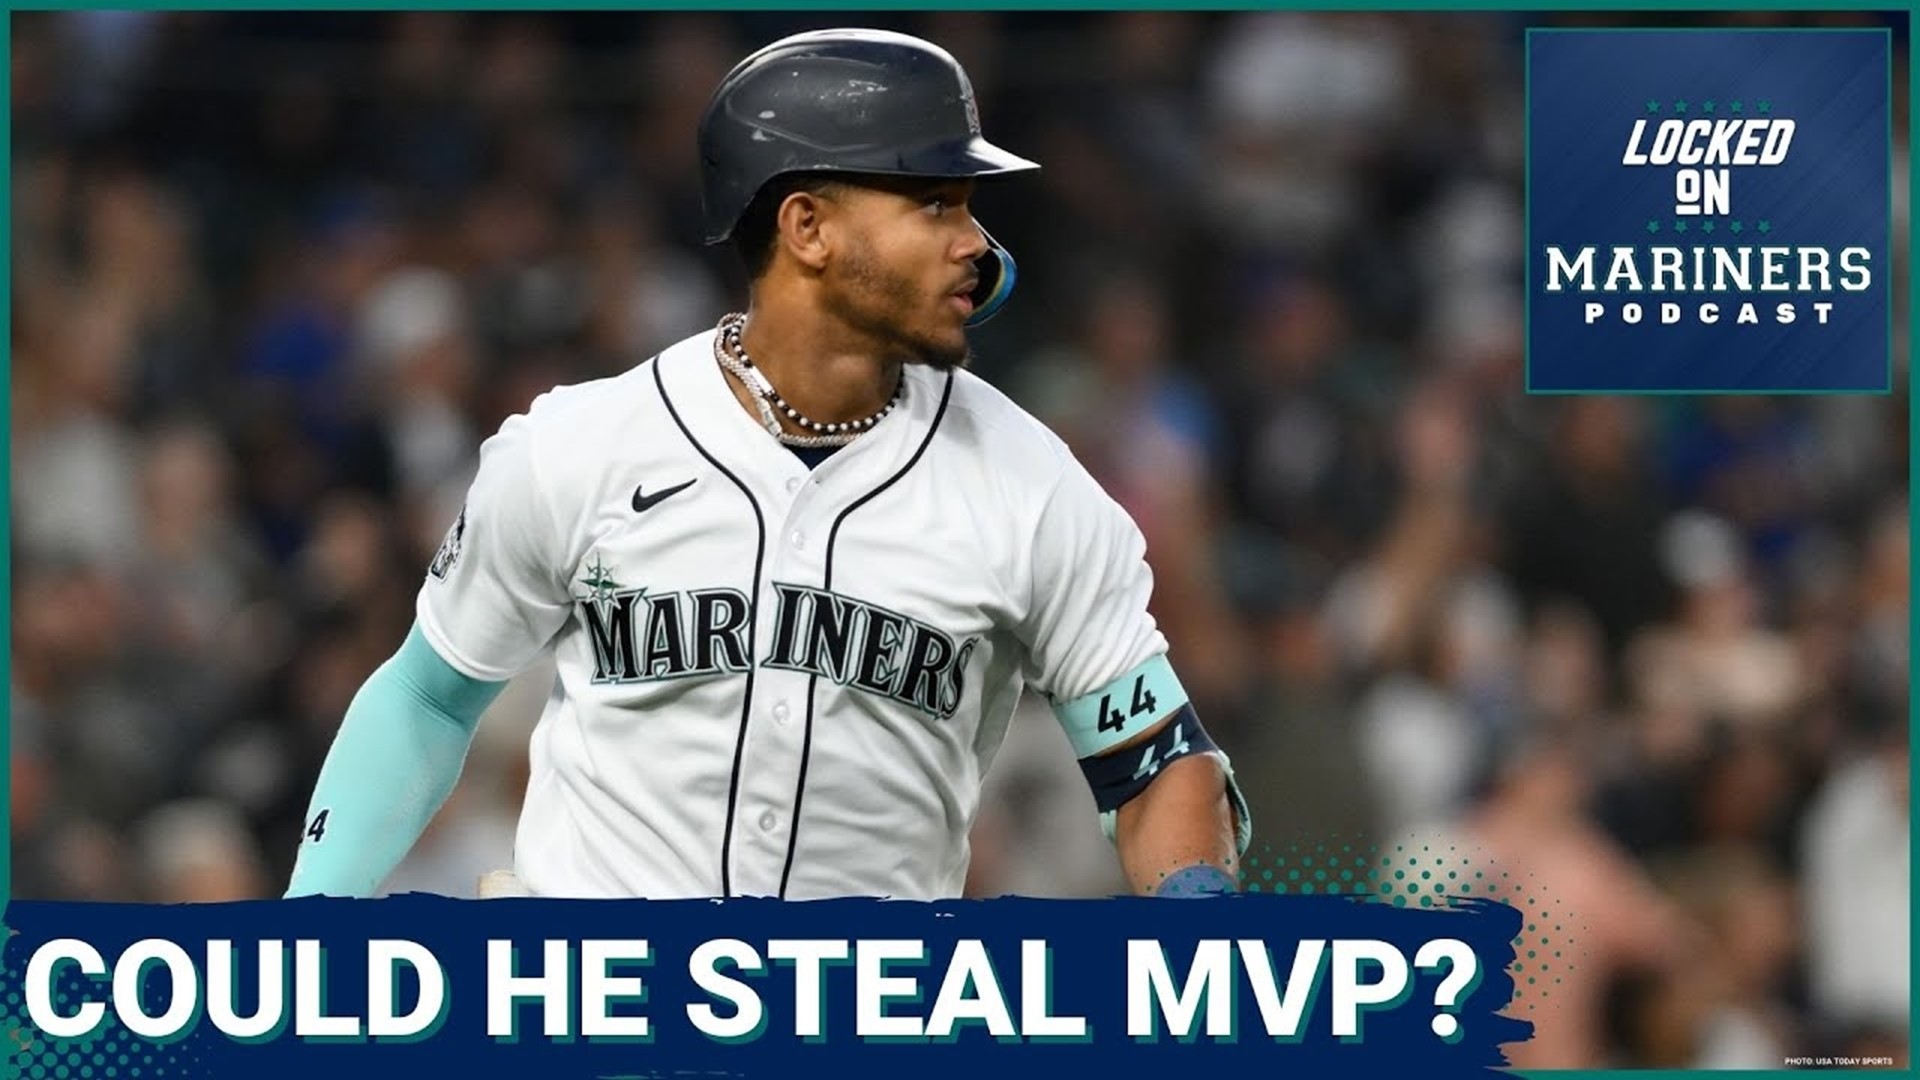 Mariners' star Julio Rodriguez named AL Player of the Week